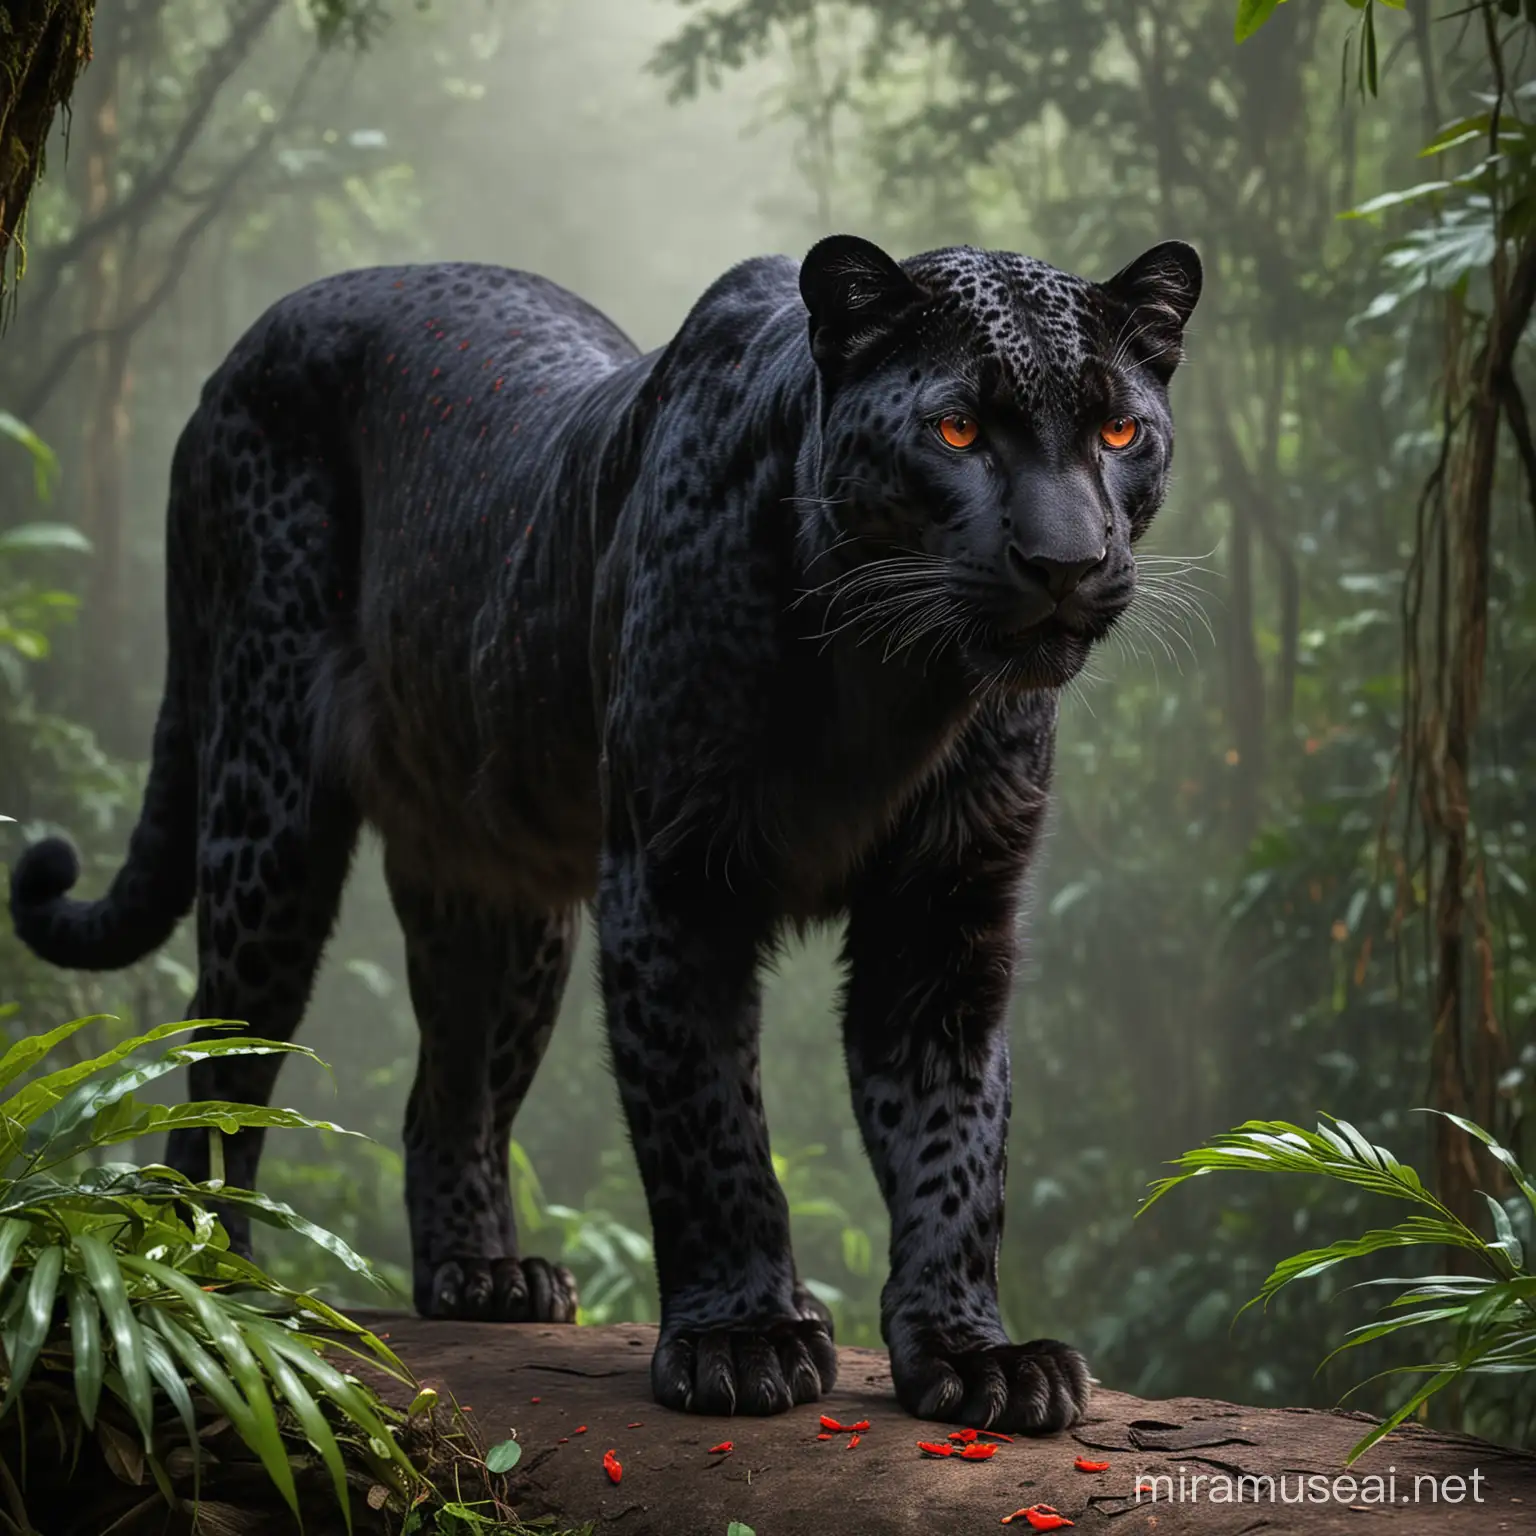 Black Leopard with Red Eyes in Rainforest